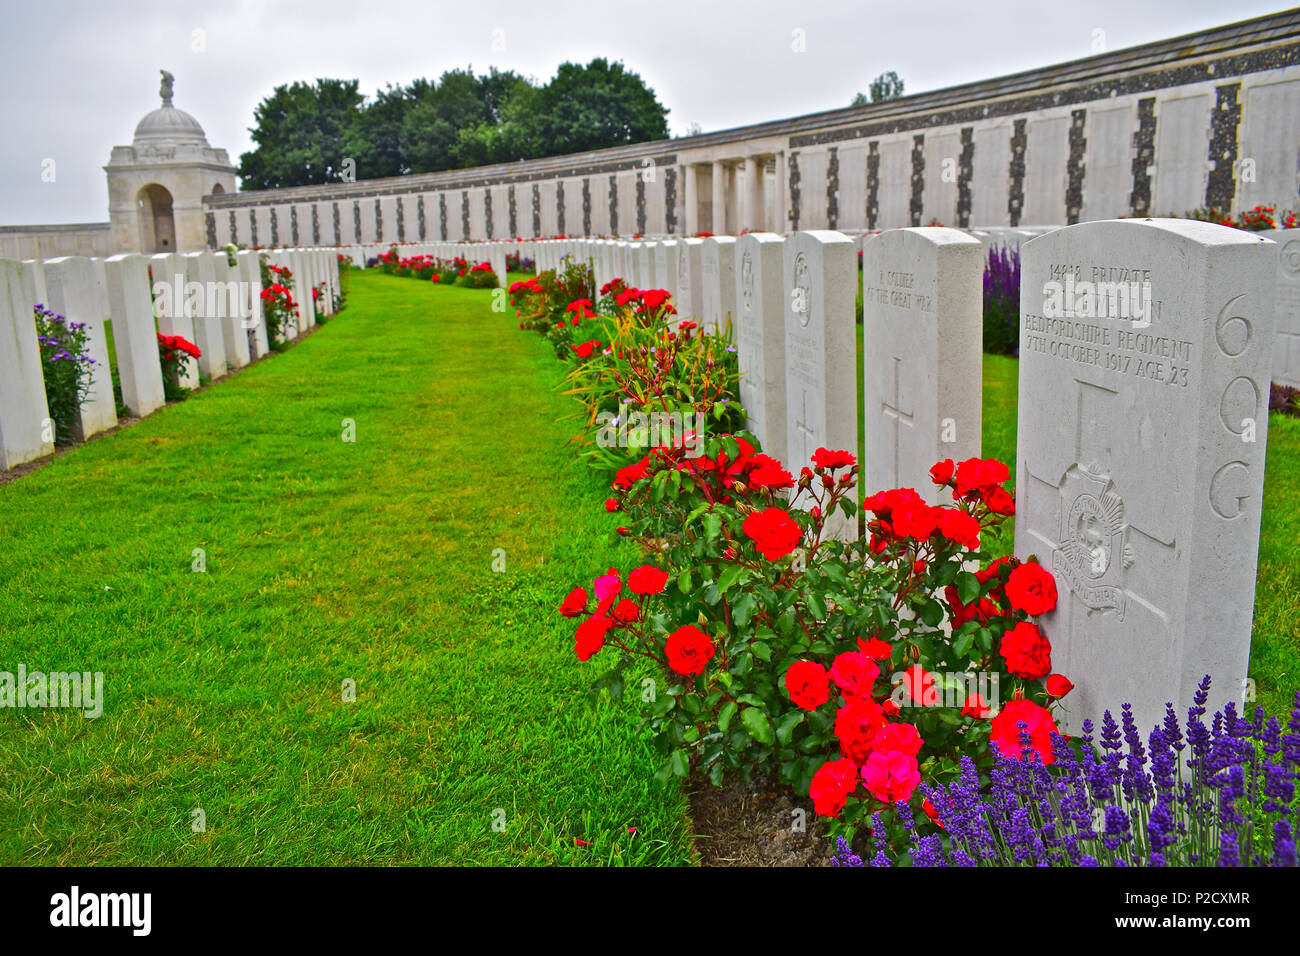 Tyne Cot WW1 Commonwealth War Graves Commission Cemetery and Memorial Gardens in Zonnebeke, Flanders Feilds, Belgium Stock Photo